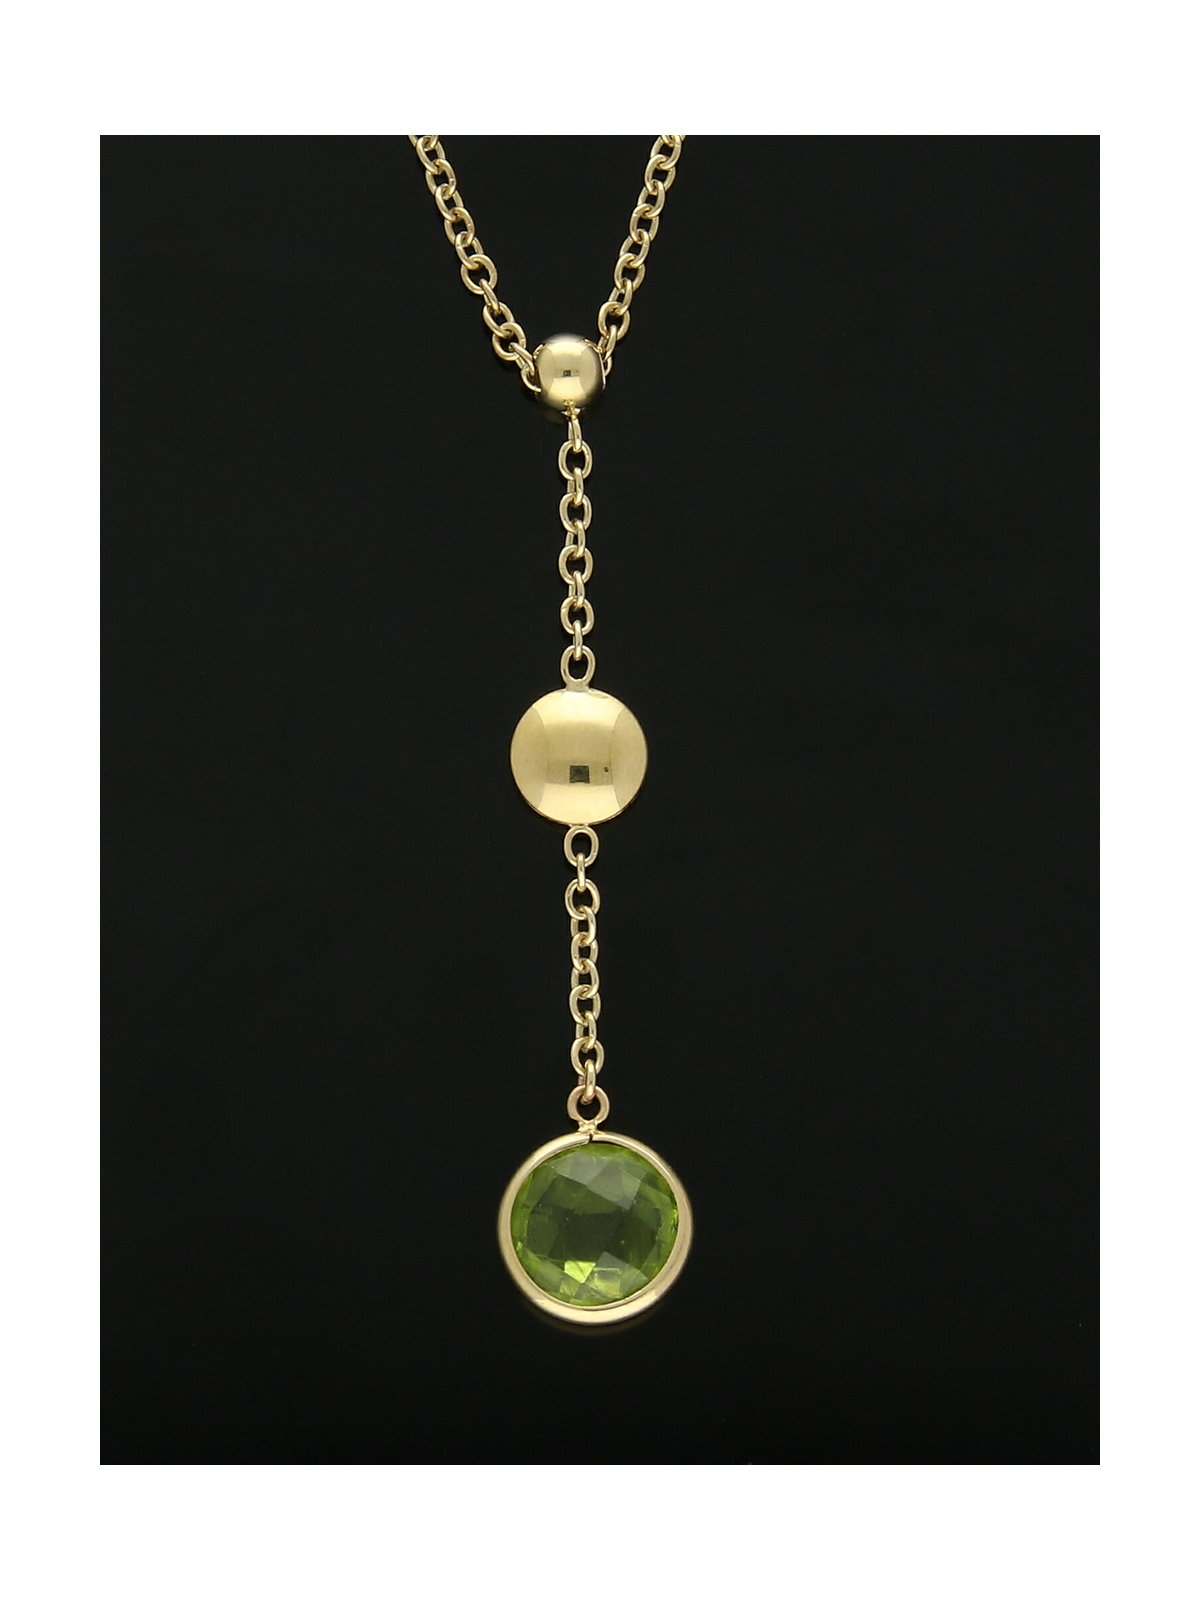 Peridot & Polished Bead Drop Pendant Necklace in 9ct Yellow Gold